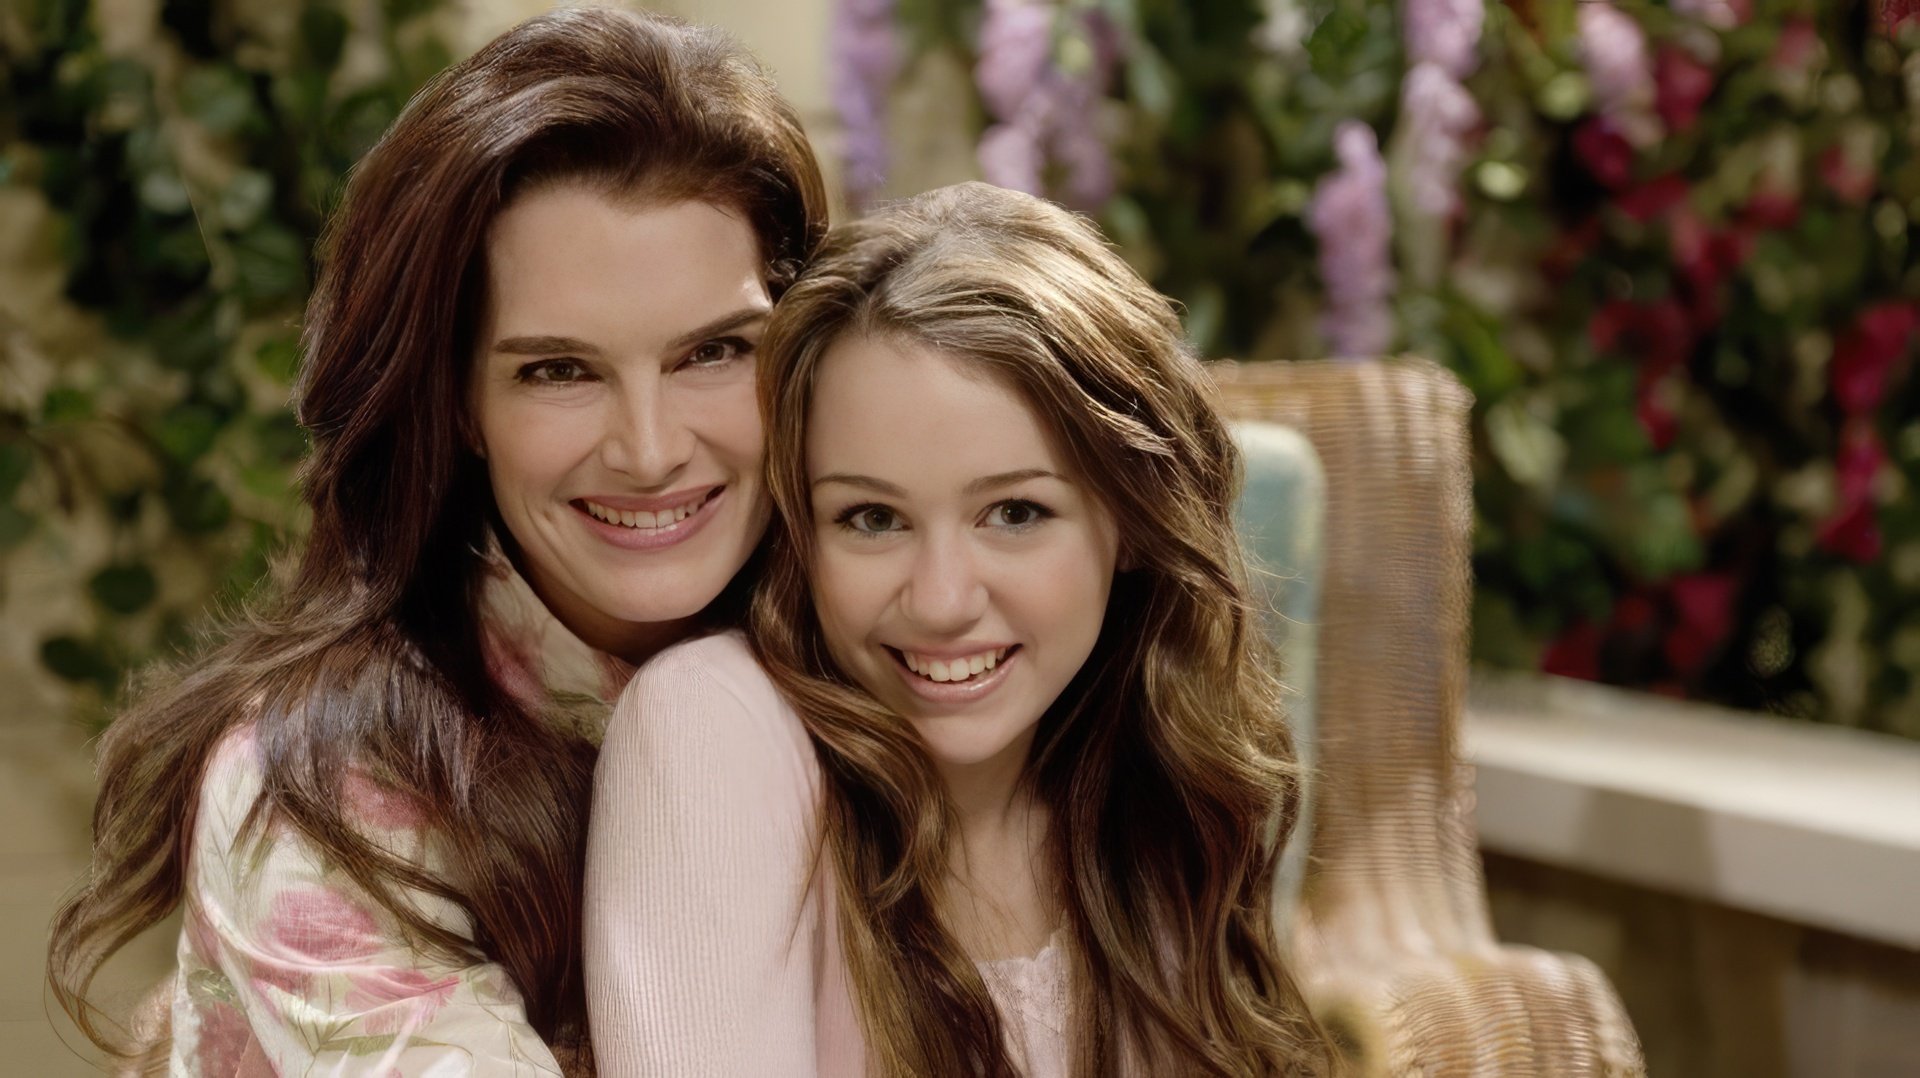 Brooke Shields and Miley Cyrus